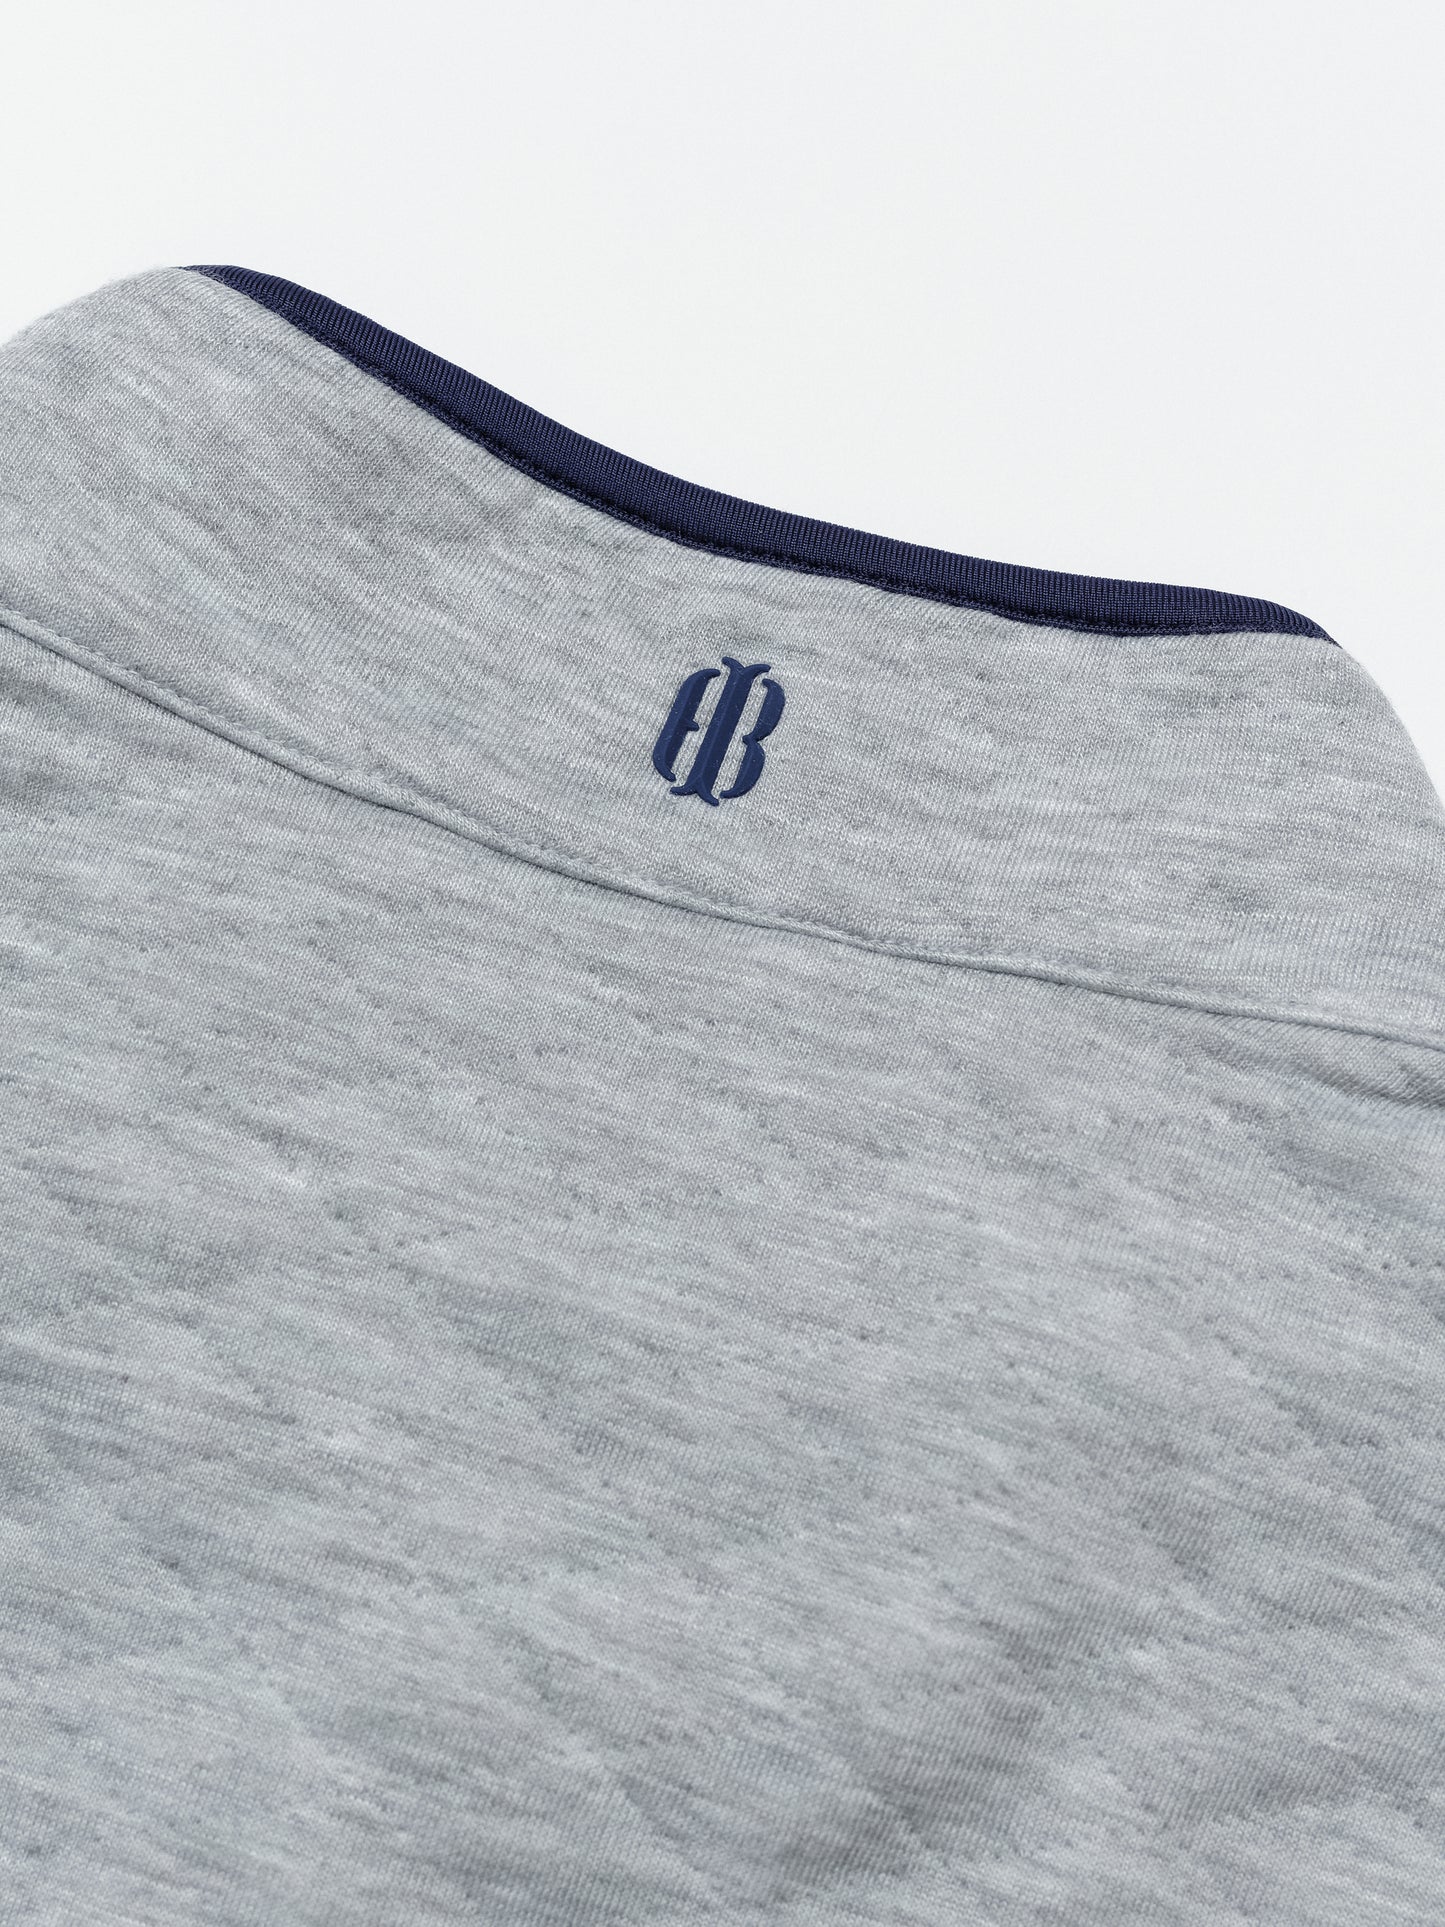 Sullivan Snap Pullover in Gray and Navy